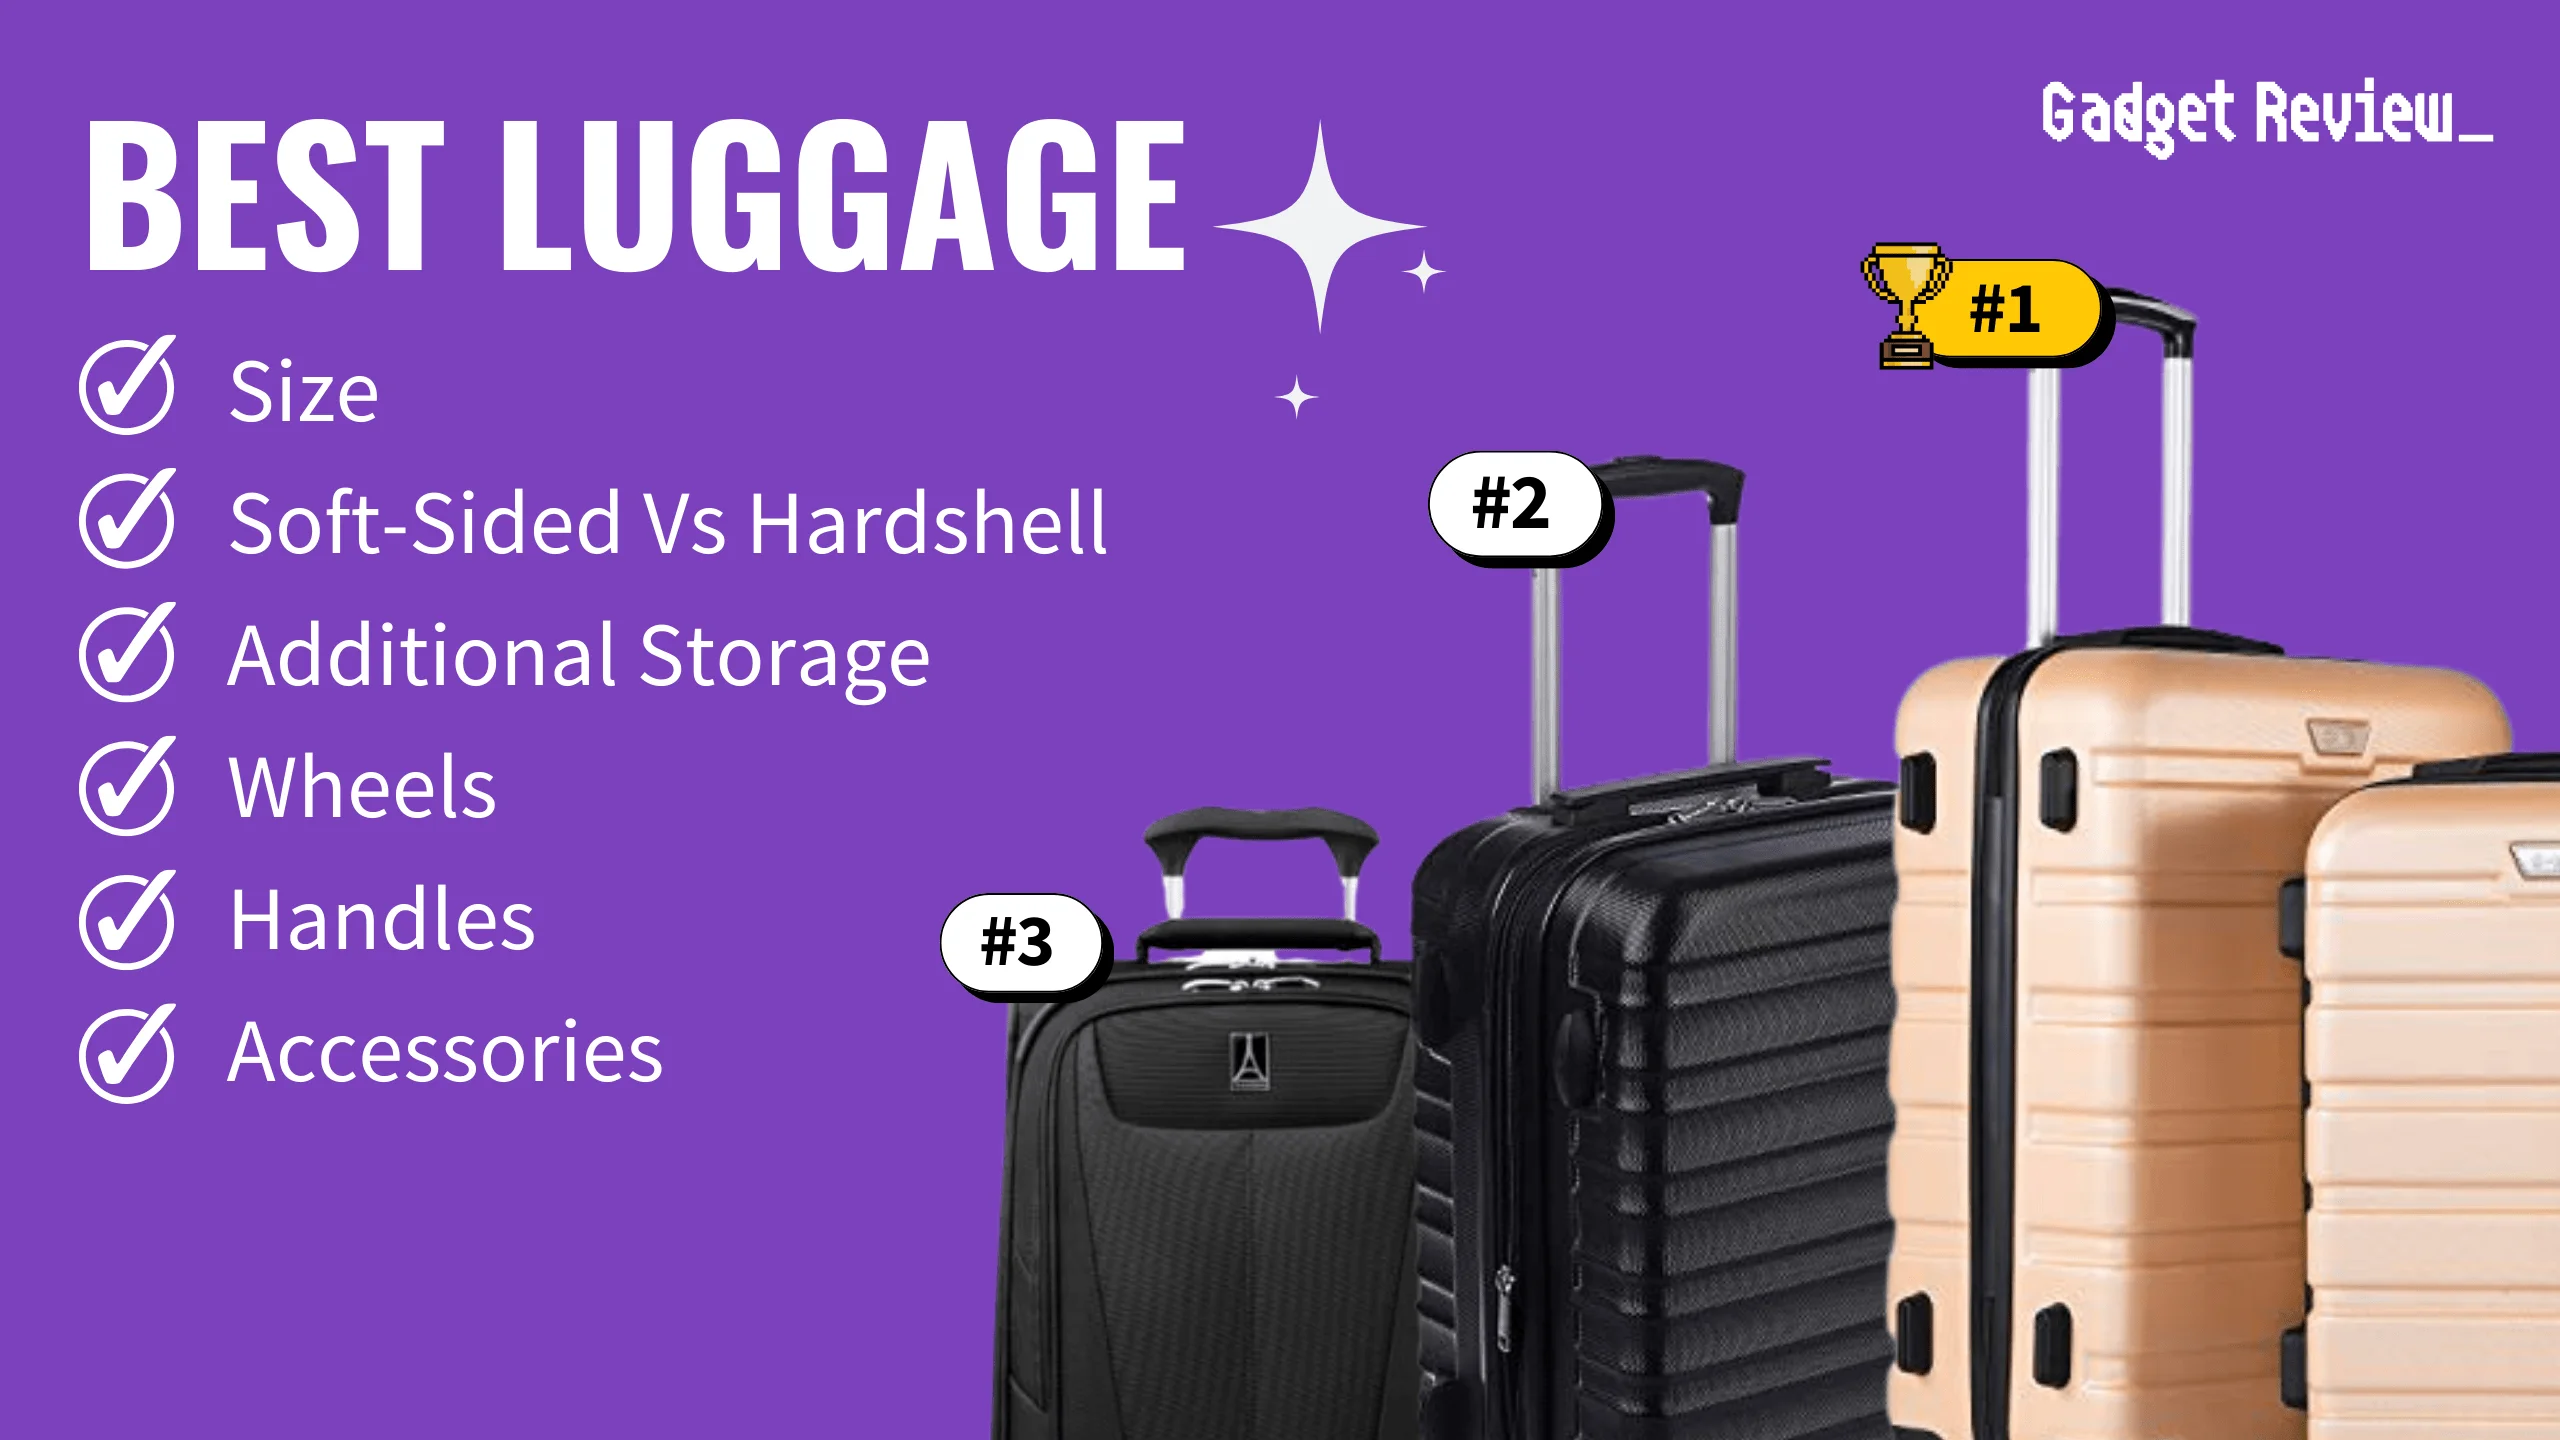 best luggage featured image that shows the top three best travel gear models